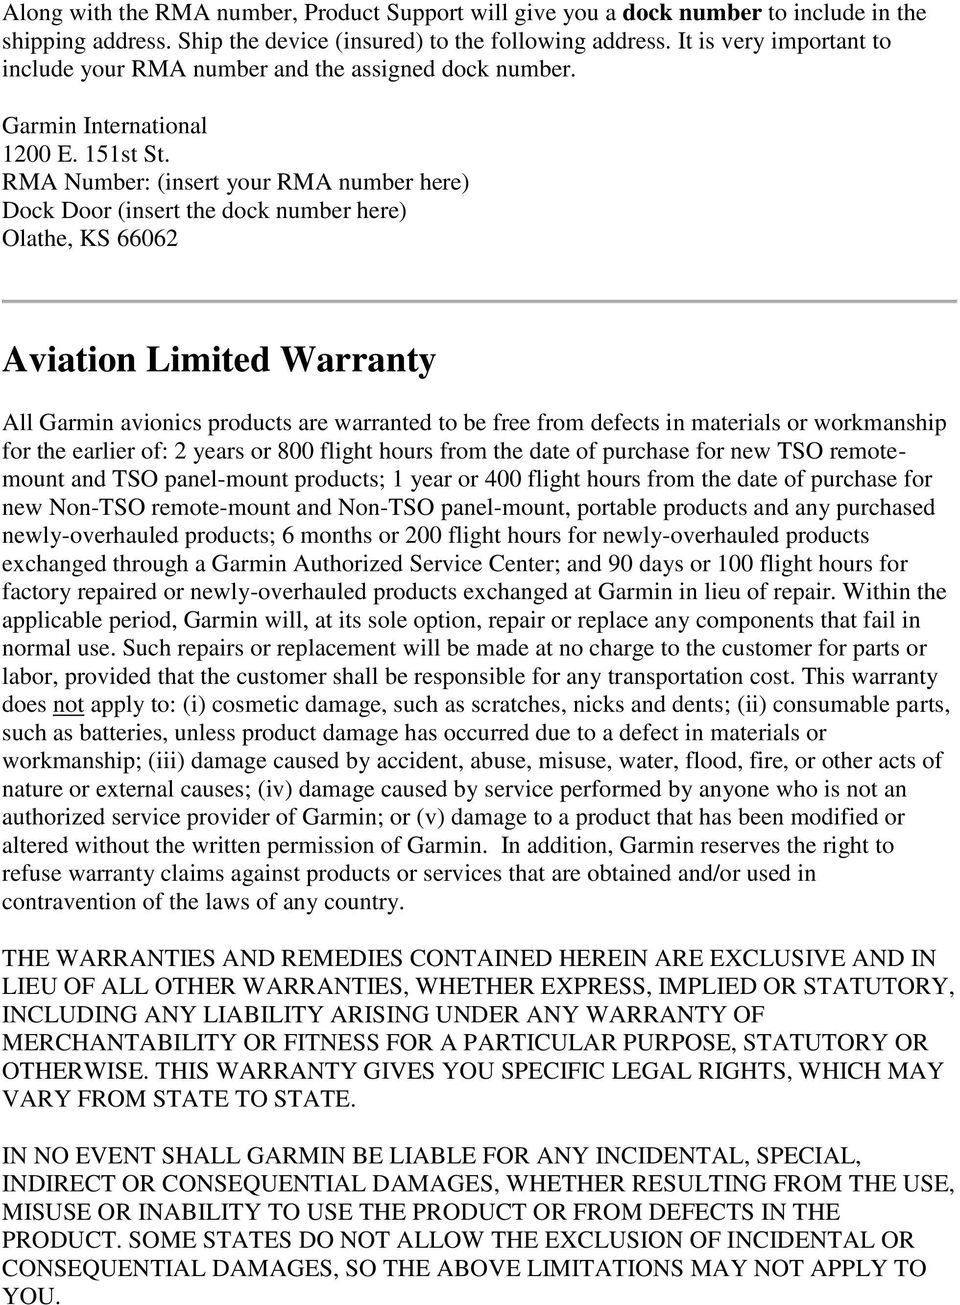 Dock Door (insert the dock number here) Olathe, KS 66062 Aviation Limited Warranty All Garmin avionics products are warranted to be free from defects in materials or workmanship for the earlier of: 2